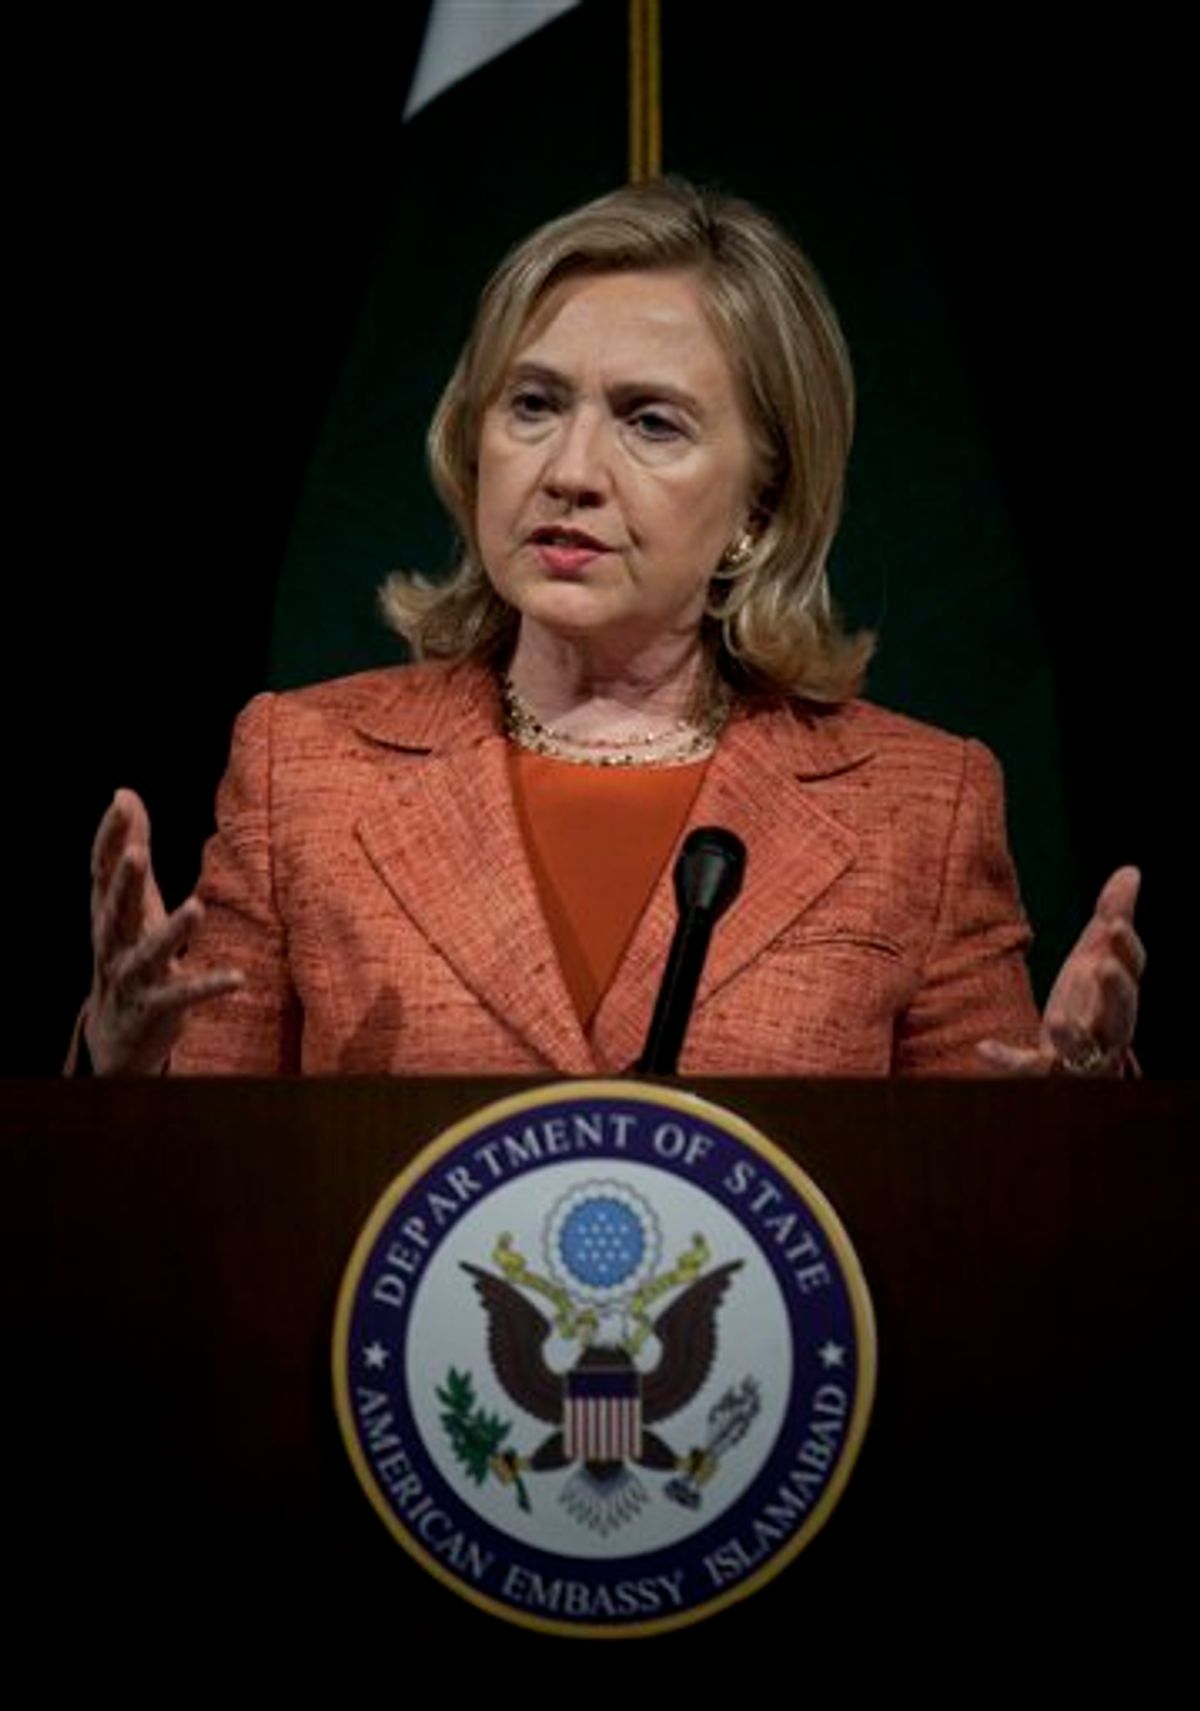 U.S. Secretary of State Hillary Rodham Clinton addresses a news conference at U. S. embassy in Islamabad, Pakistan Friday, May 27, 2011. Clinton said that relations between the United States and Pakistan had reached a turning point after the killing of Osama bin Laden and Islamabad must make "decisive steps" in the days ahead to fight terrorism. (AP Photo/B.K.Bangash) (AP)